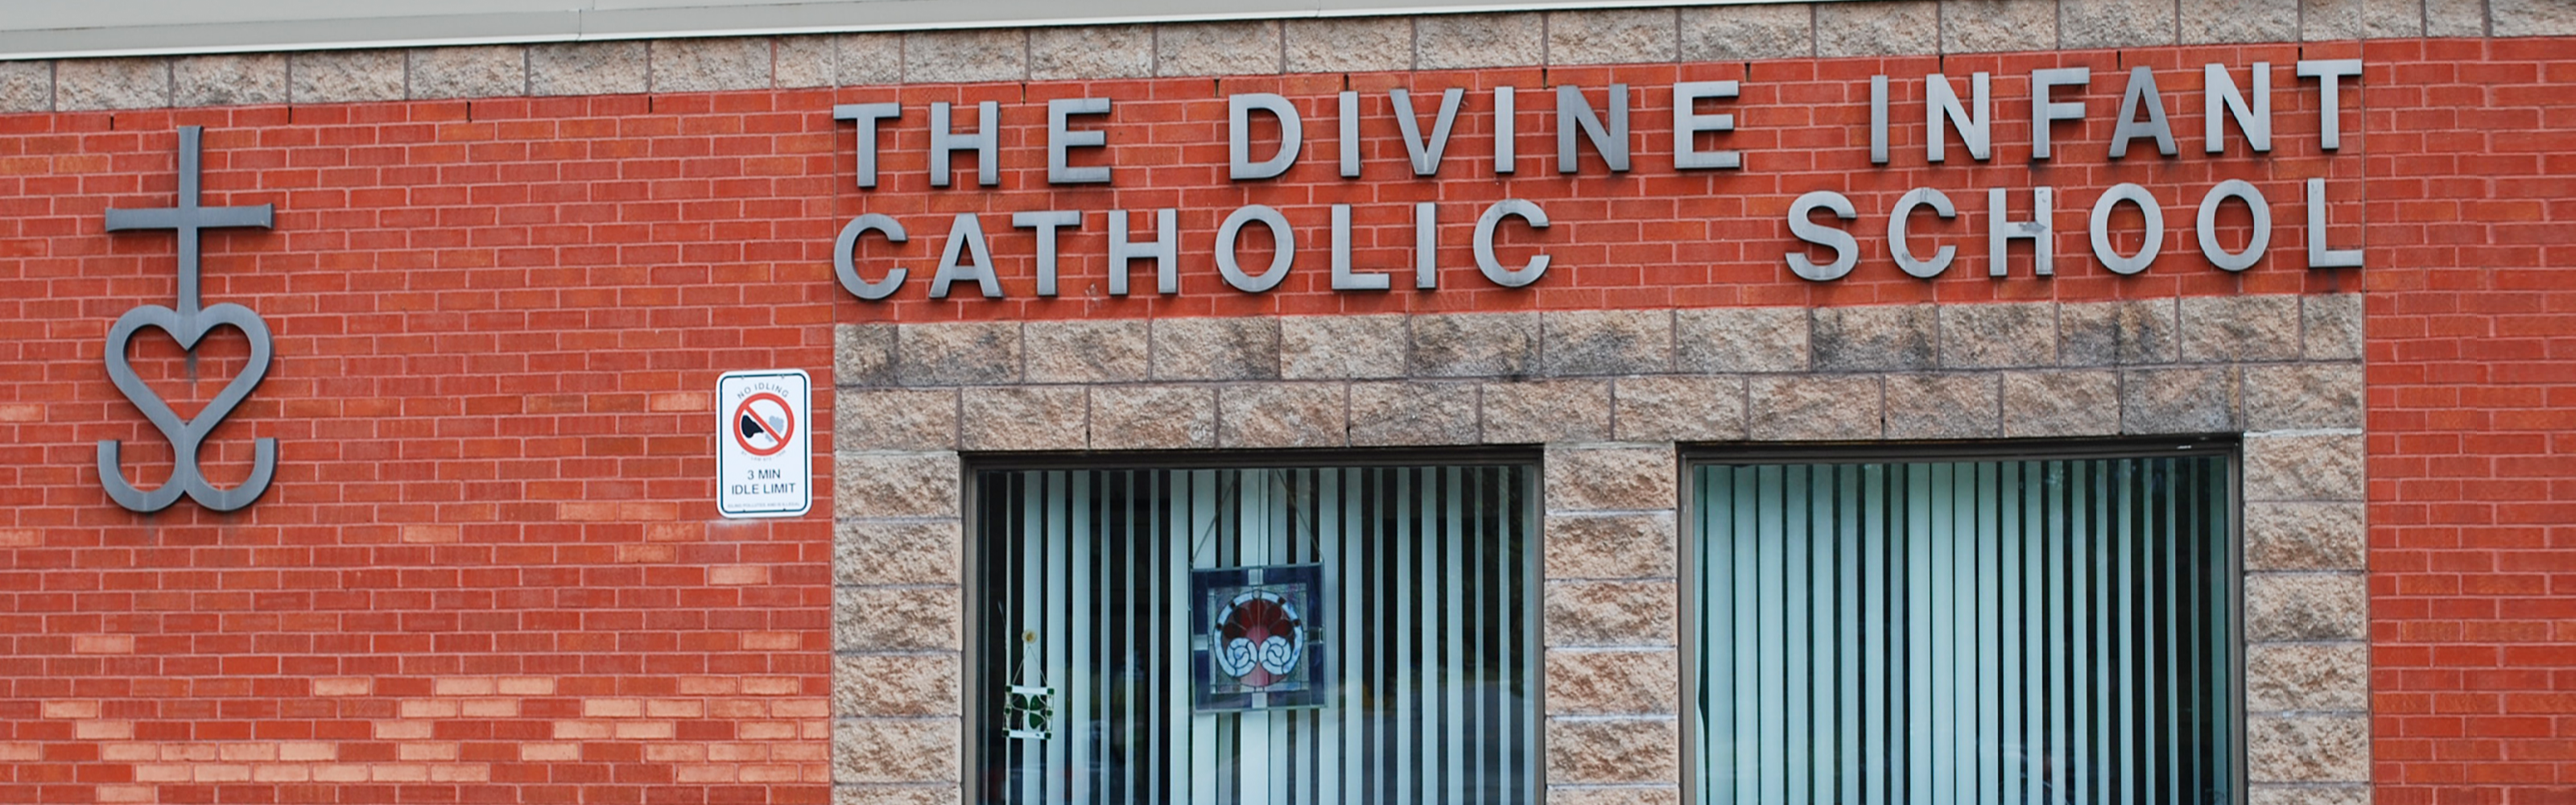 The front of the The Divine Infant Catholic School building.